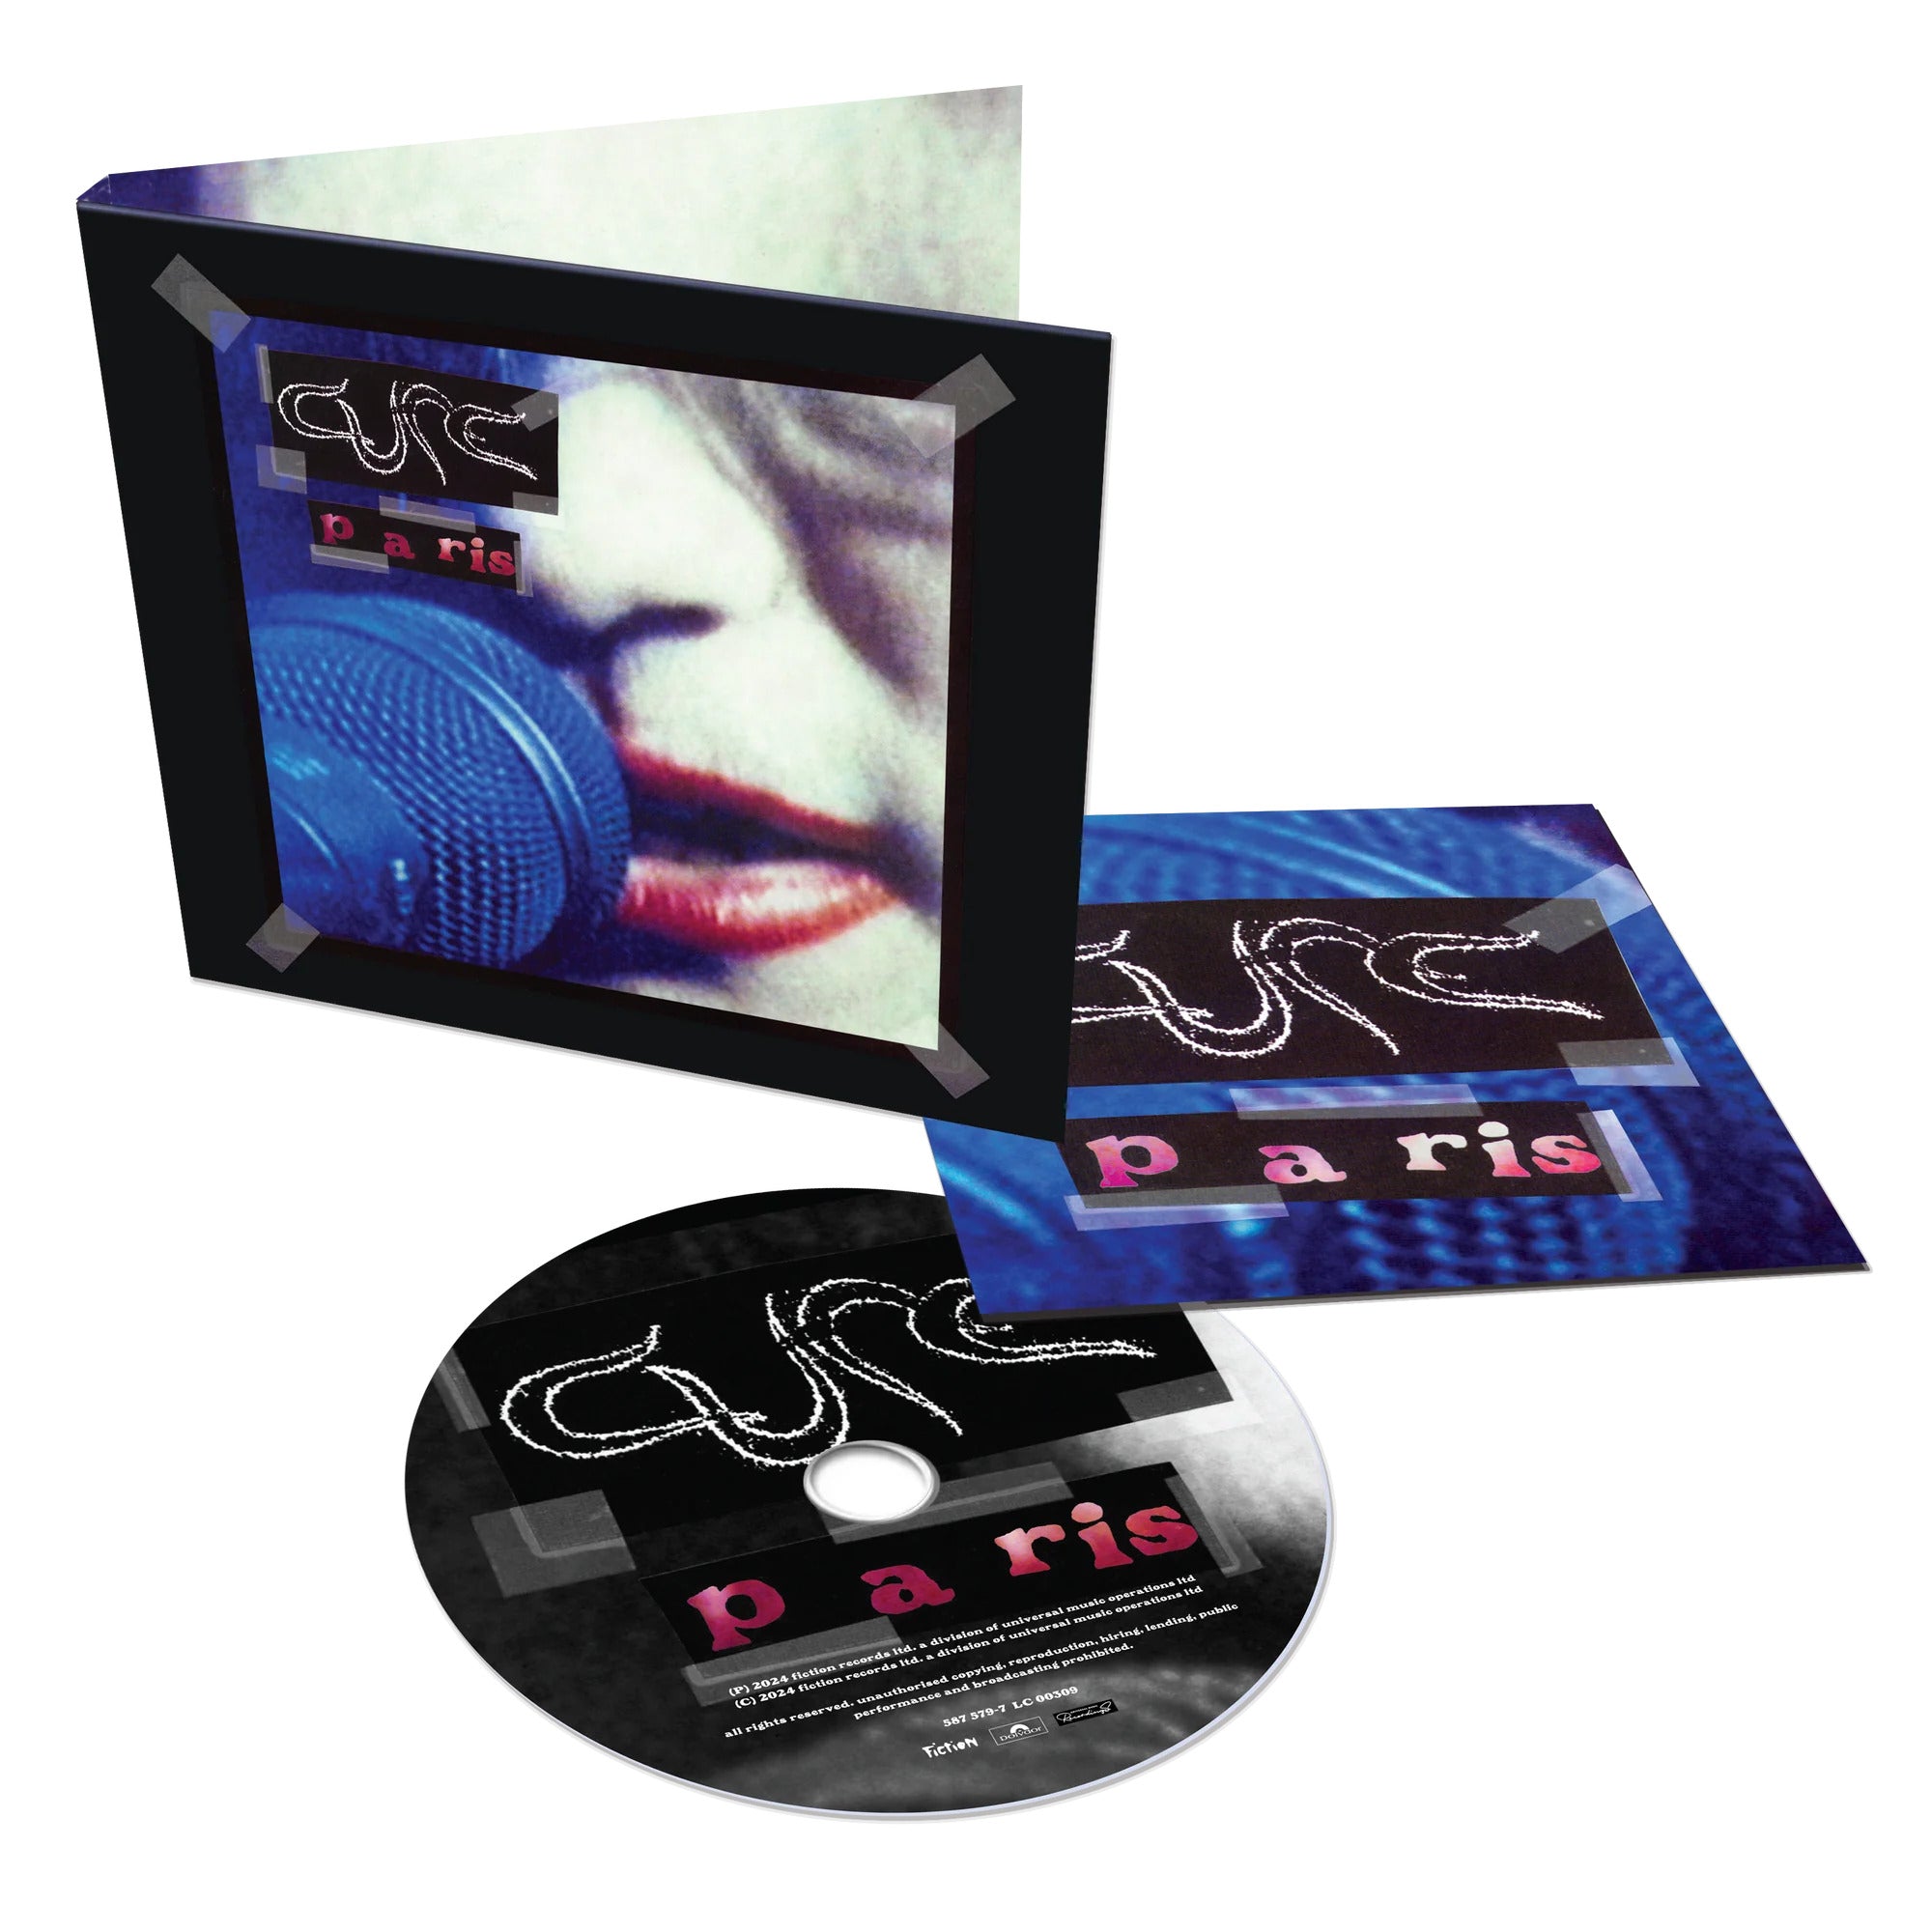 THE CURE - Paris (30th Anniversary Edition) - CD